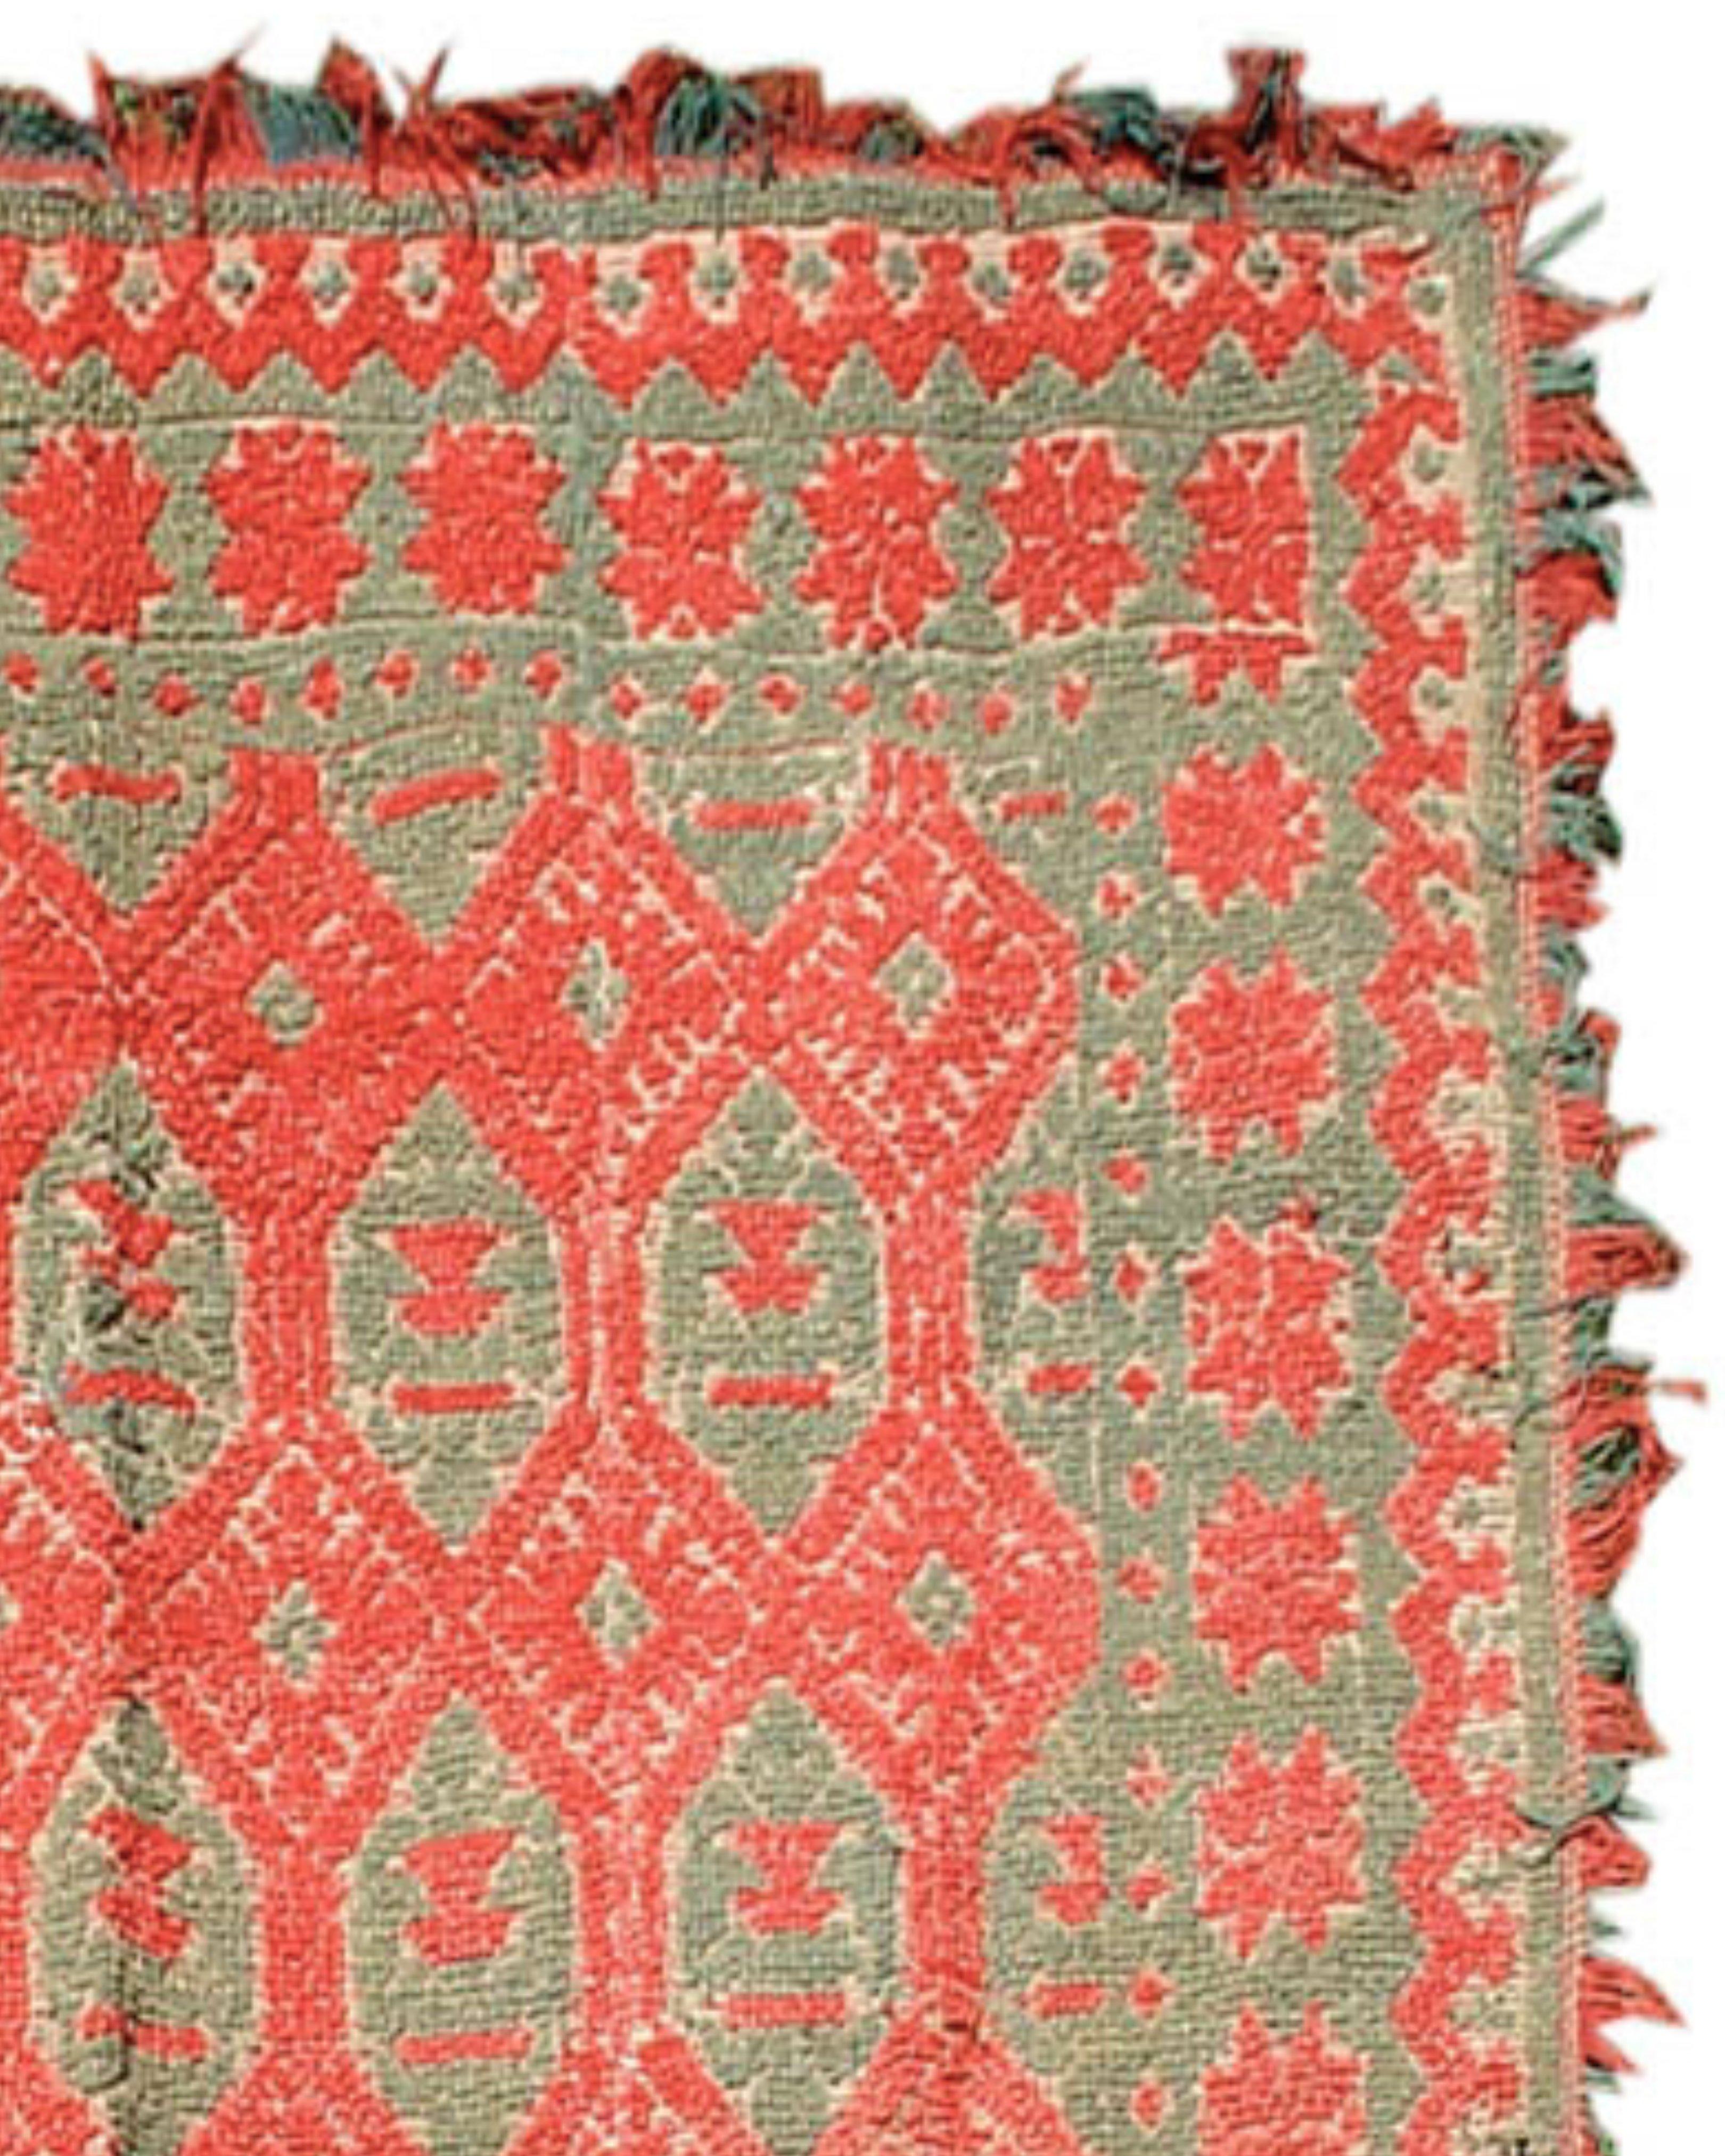 Antique Red and Green Spanish Alpujara Rug, 19th Century

Additional information:
Dimensions: 5'11